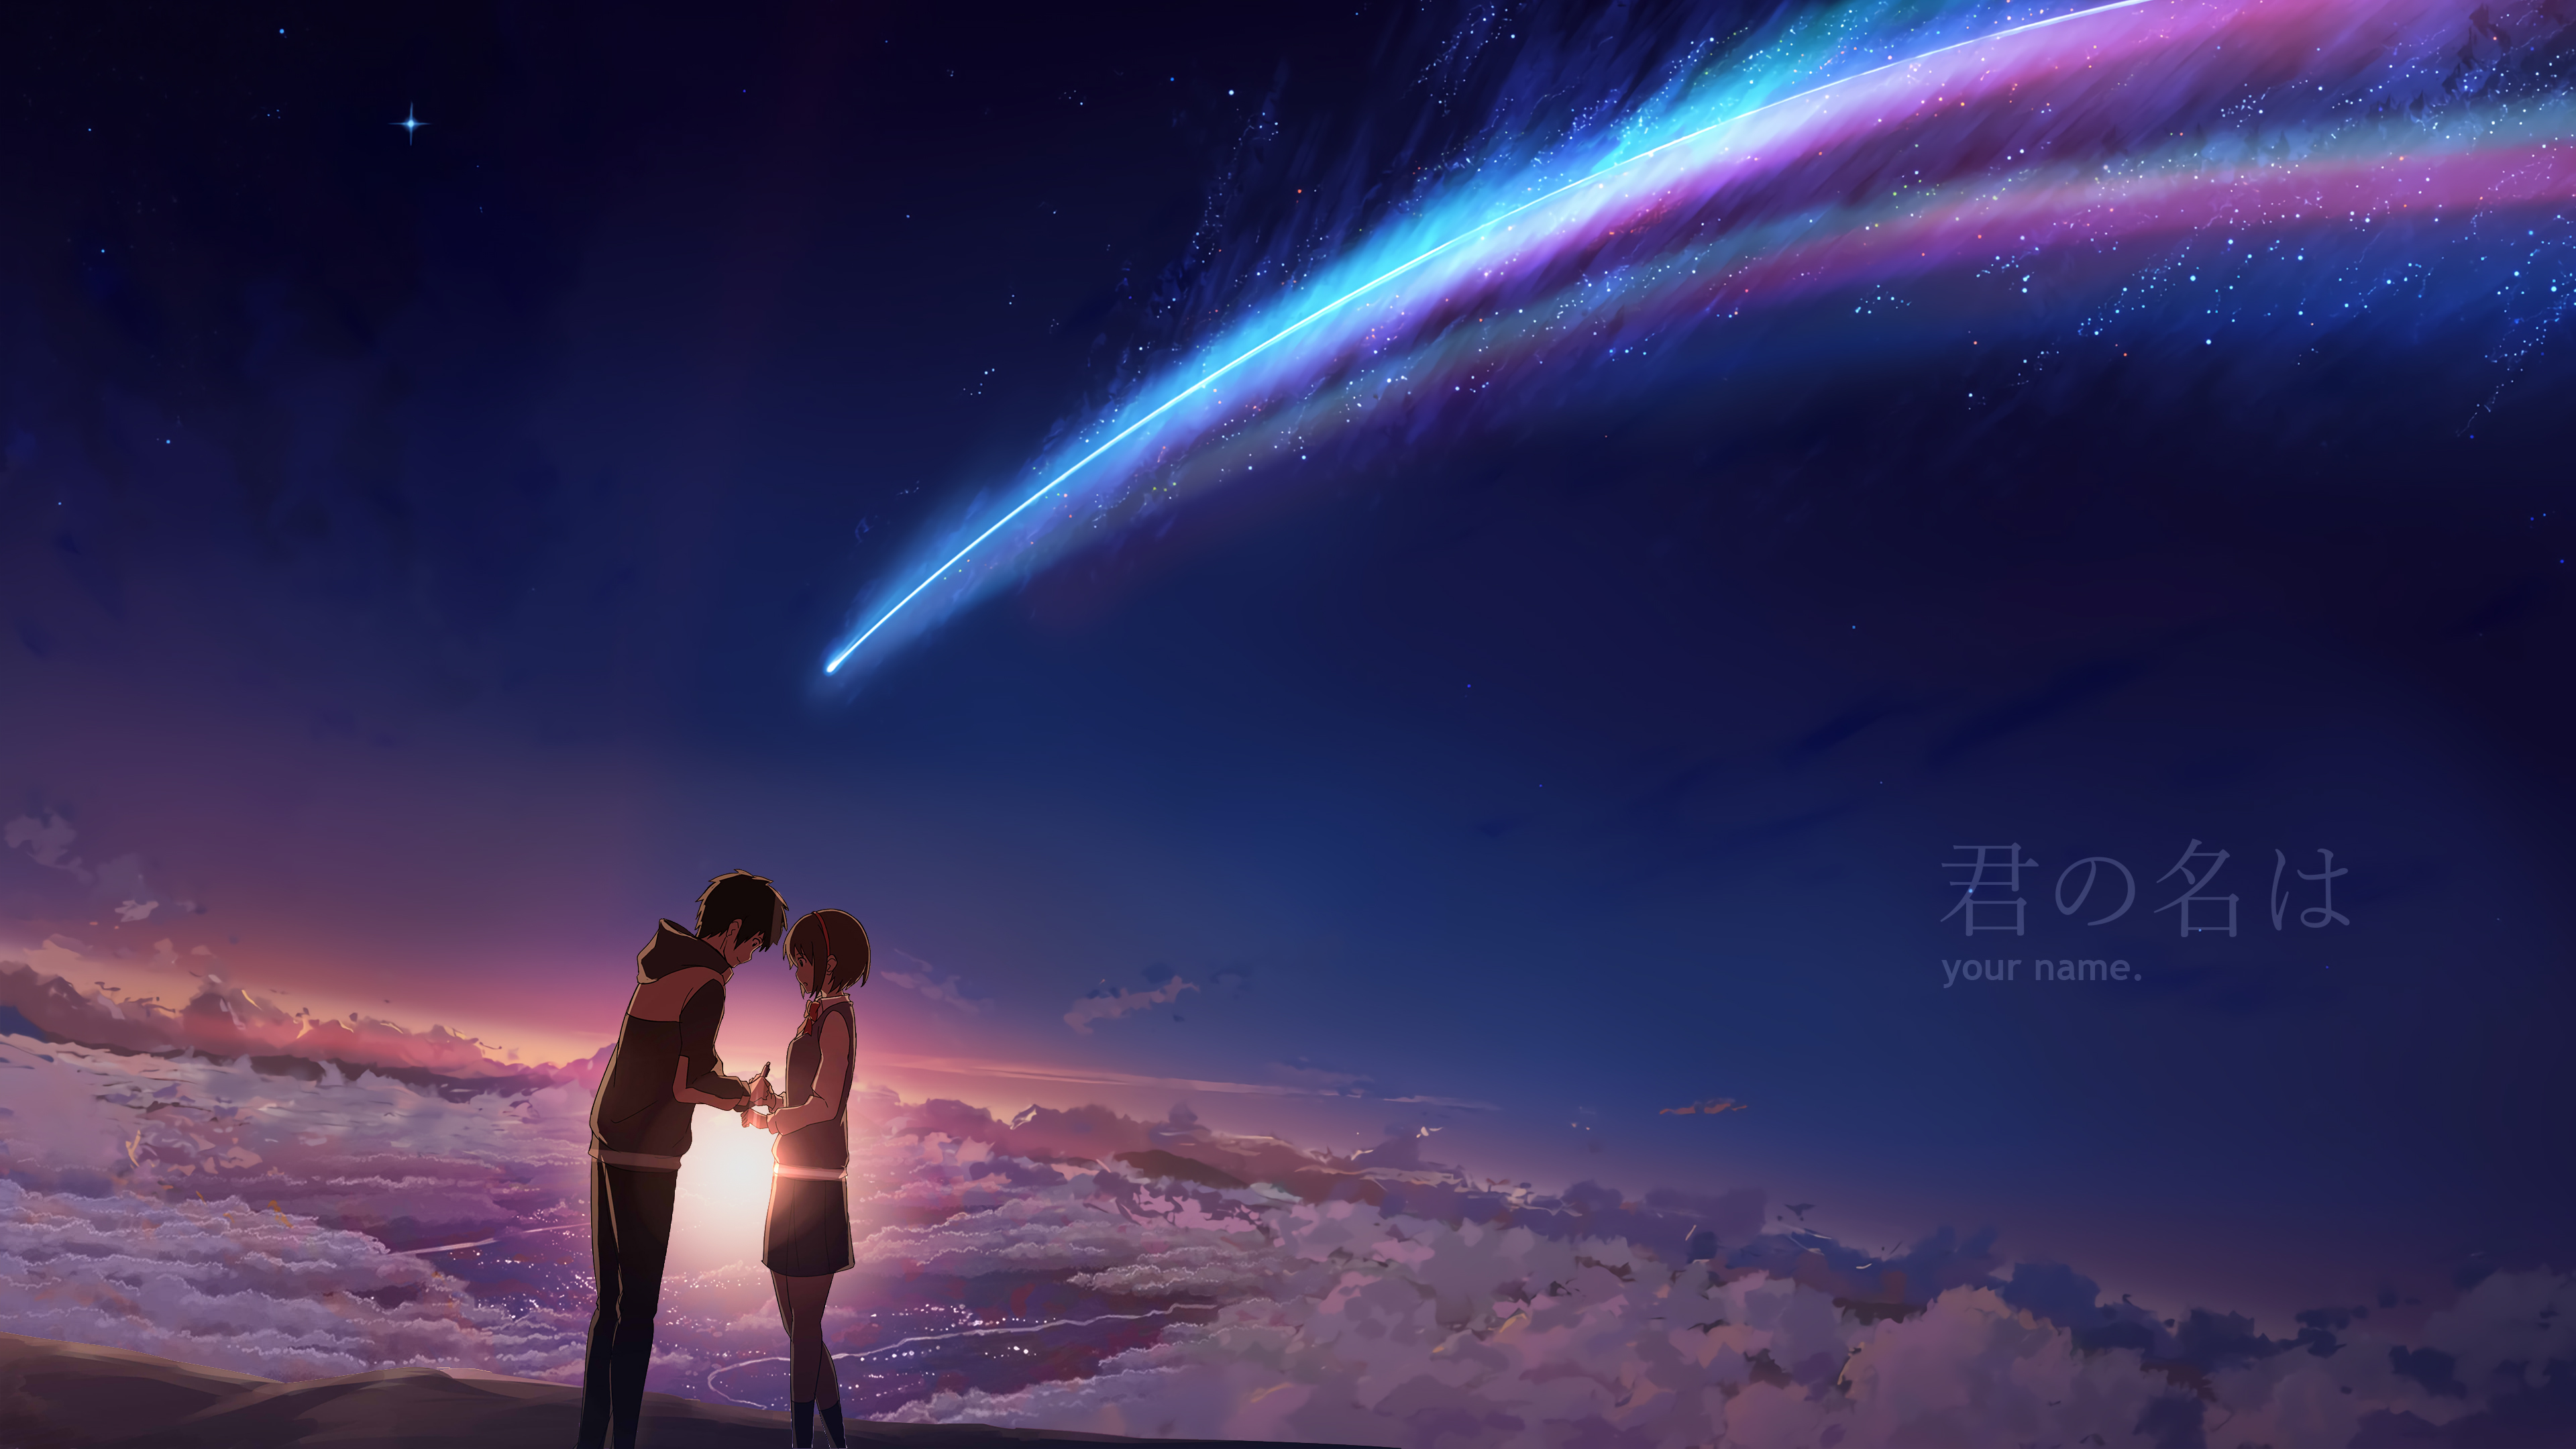 Kimi No Na Wa Your Name Movie Review Subbed And Dubbed Manly Tears Podcast